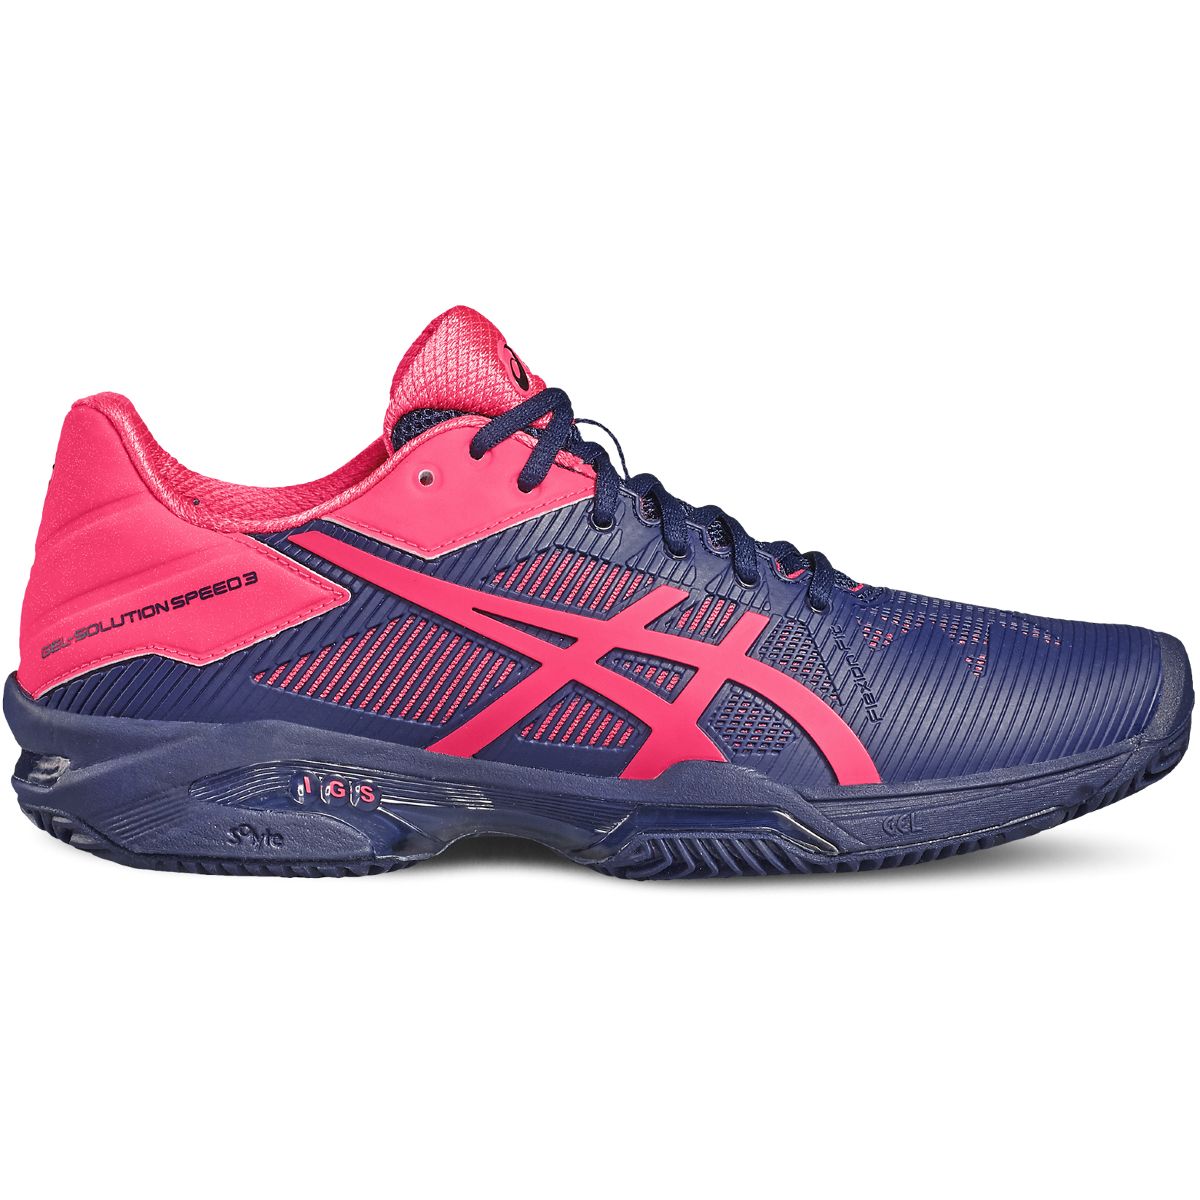 Asics Gel Solution Speed 3 Clay Women's Tennis Shoes E651N-4